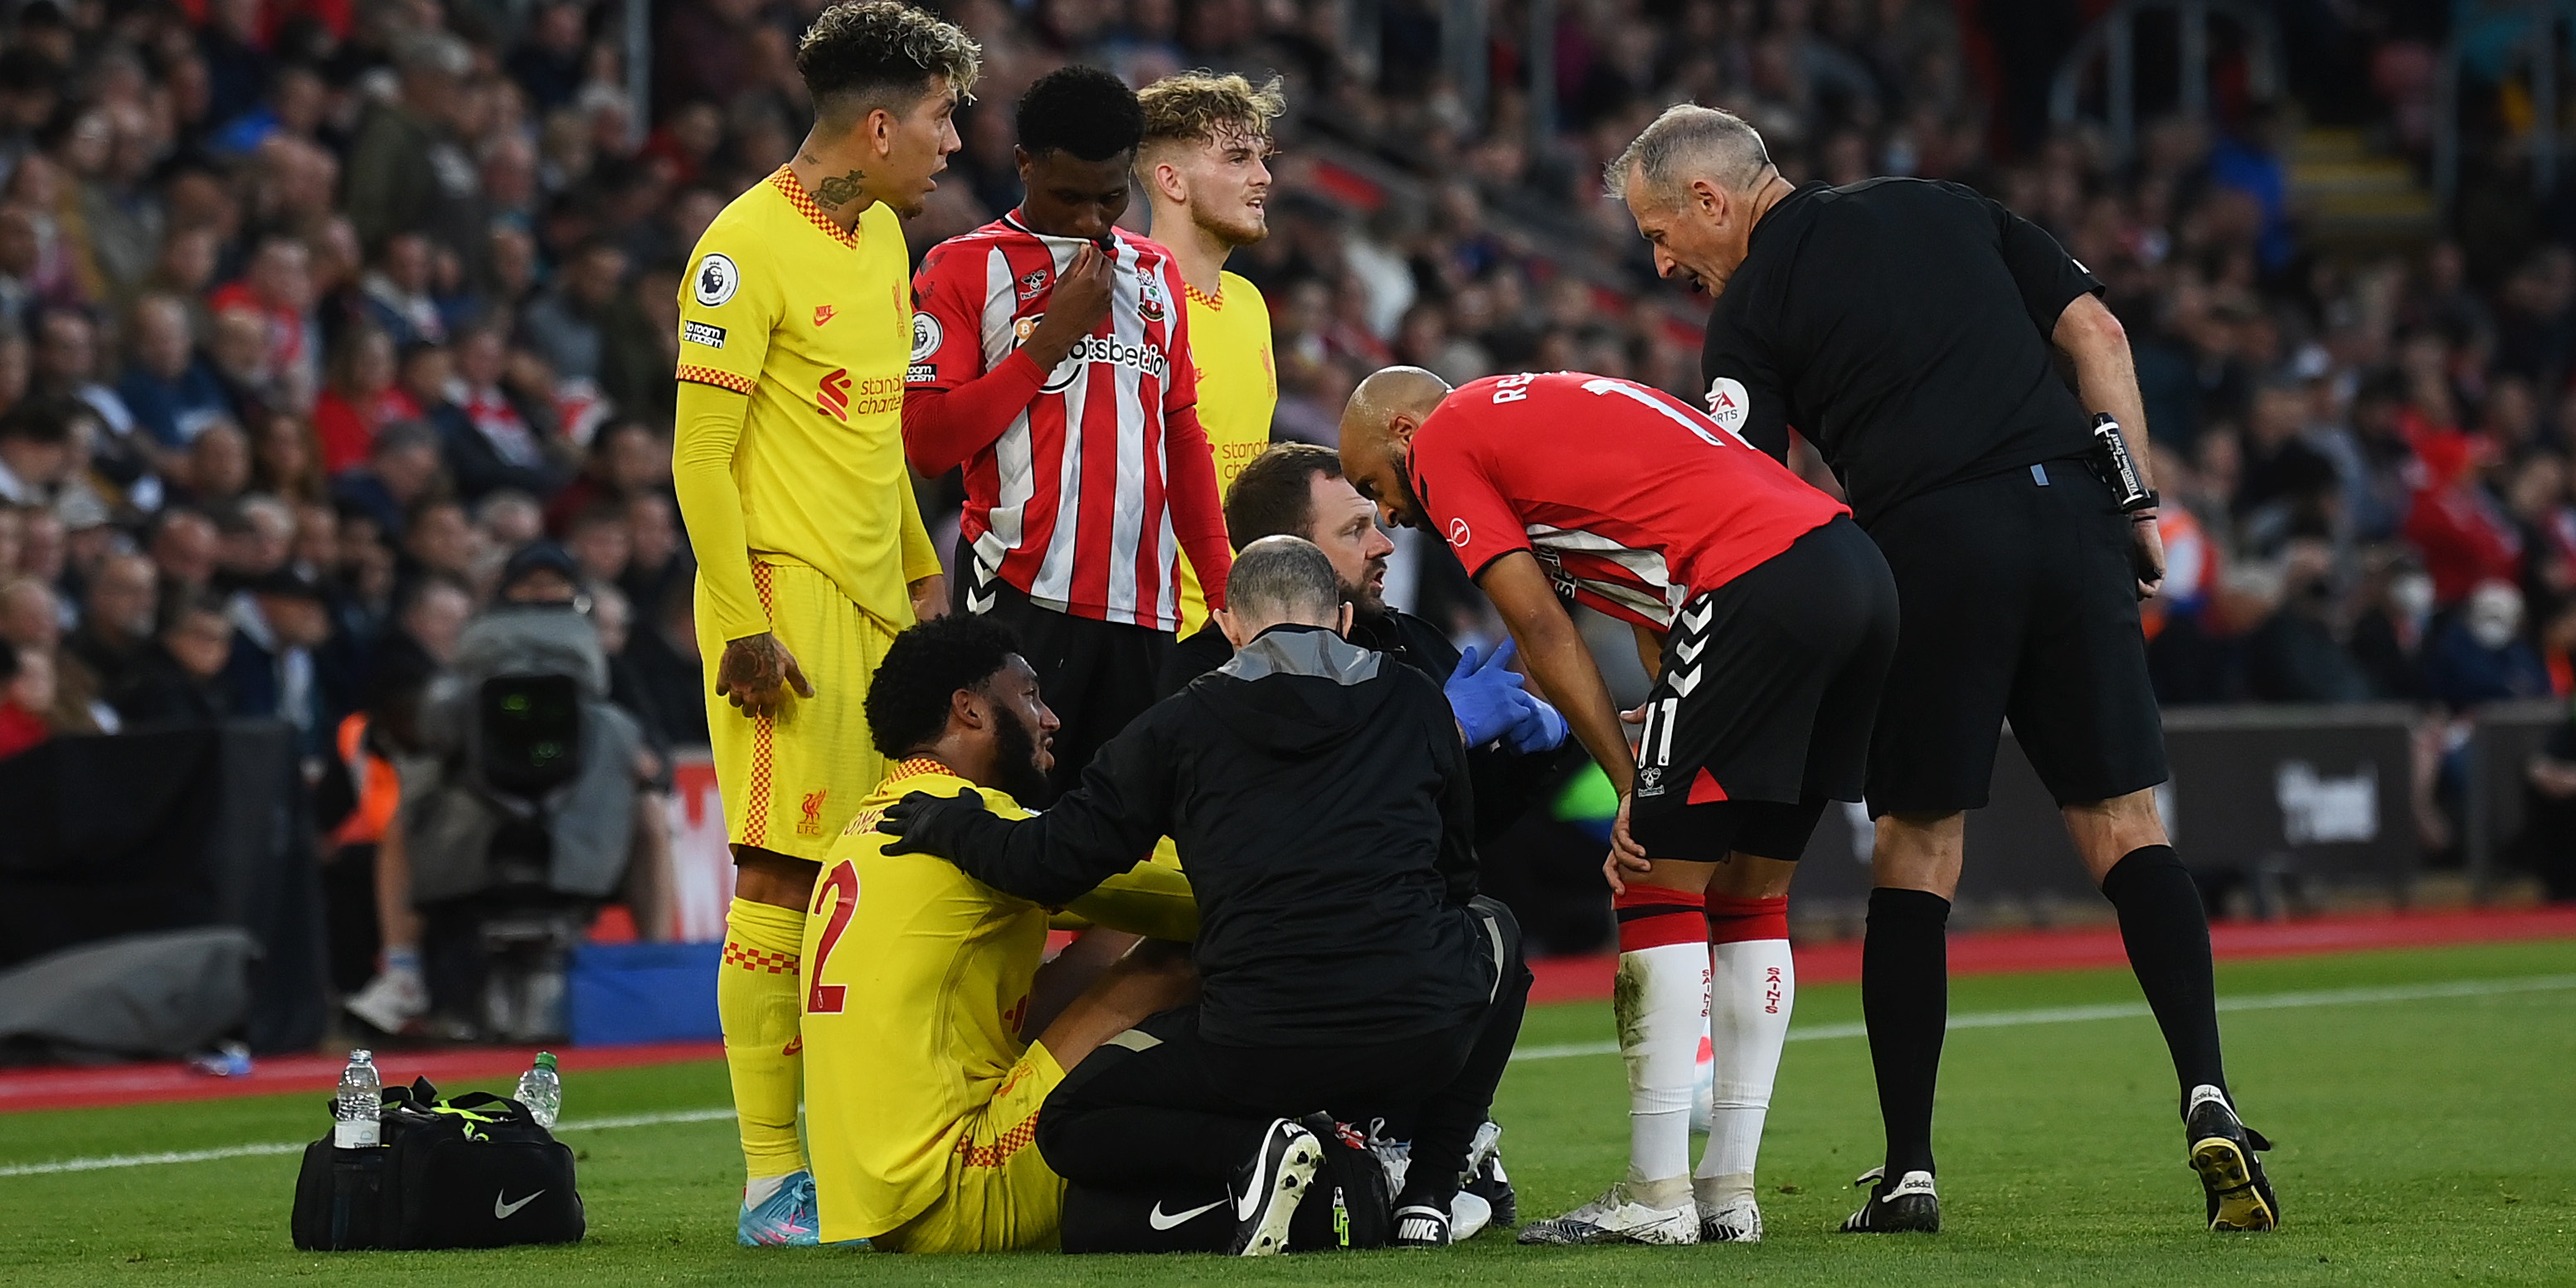 Joyce issues latest injury update on Joe Gomez after Liverpool defender spotted in agony after Southampton tackle